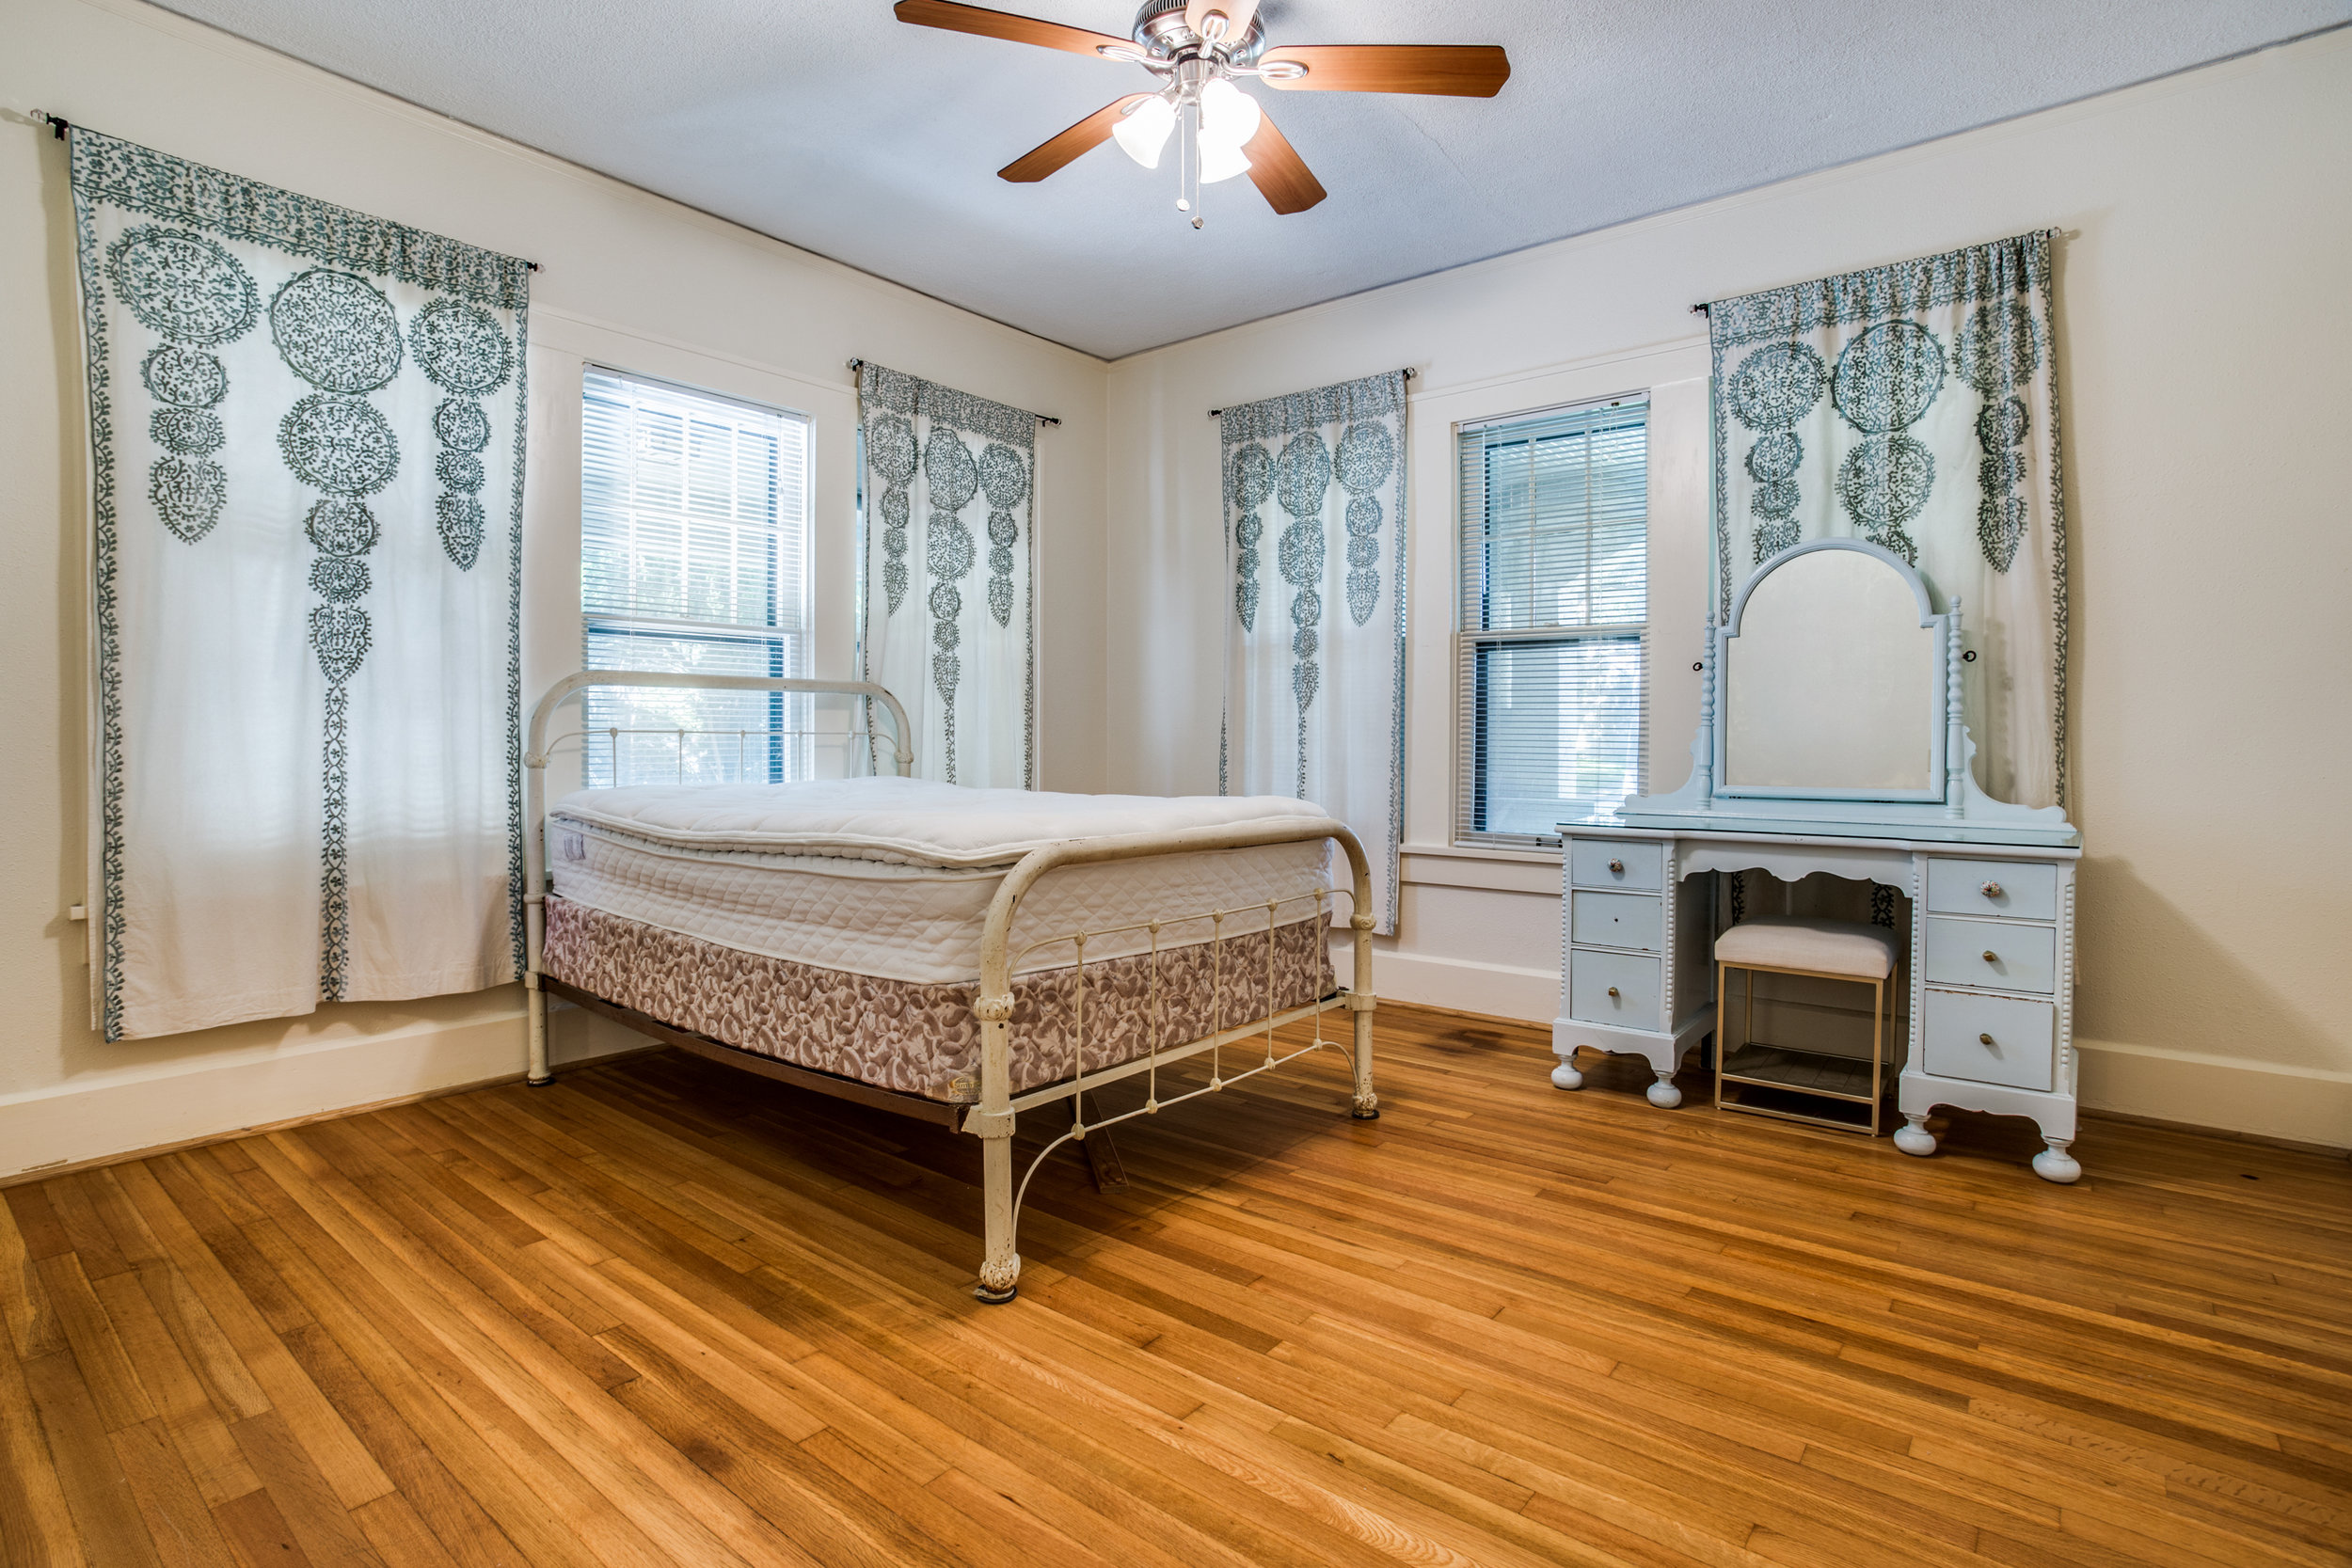 2625-cockrell-ave-fort-worth-tx-High-Res-9.jpg